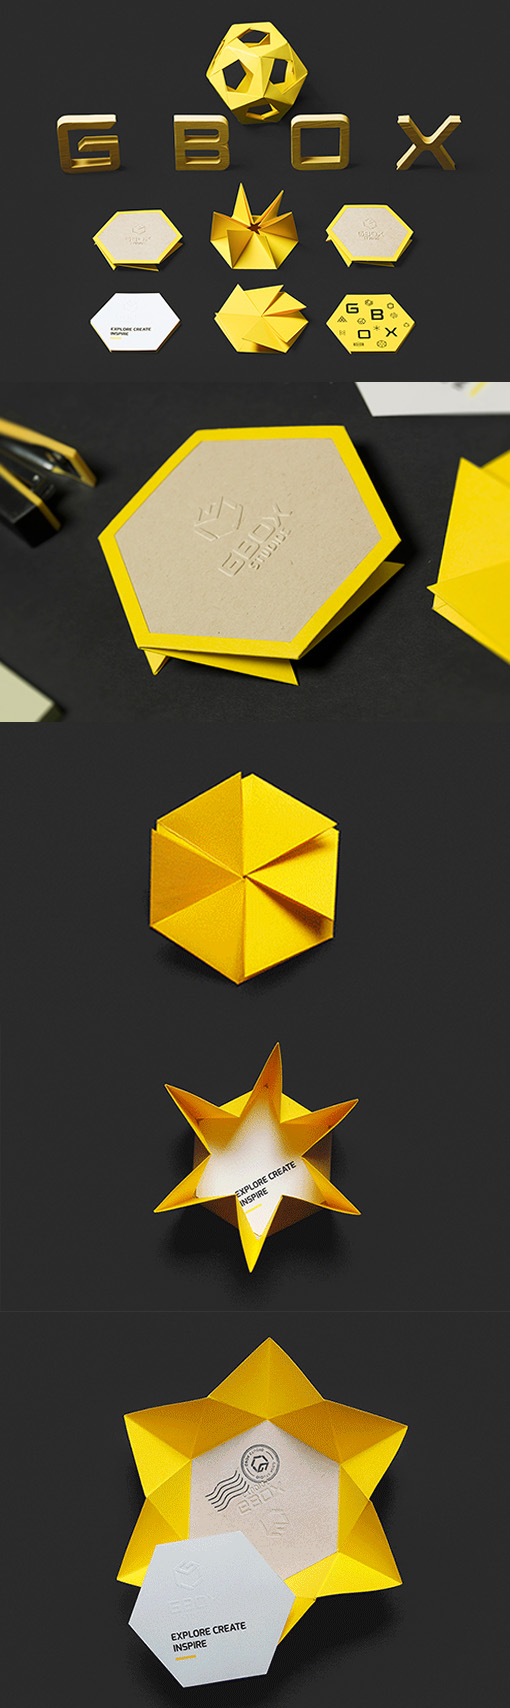 Inspired Origami Style Interactive Business Card For A Design Studio